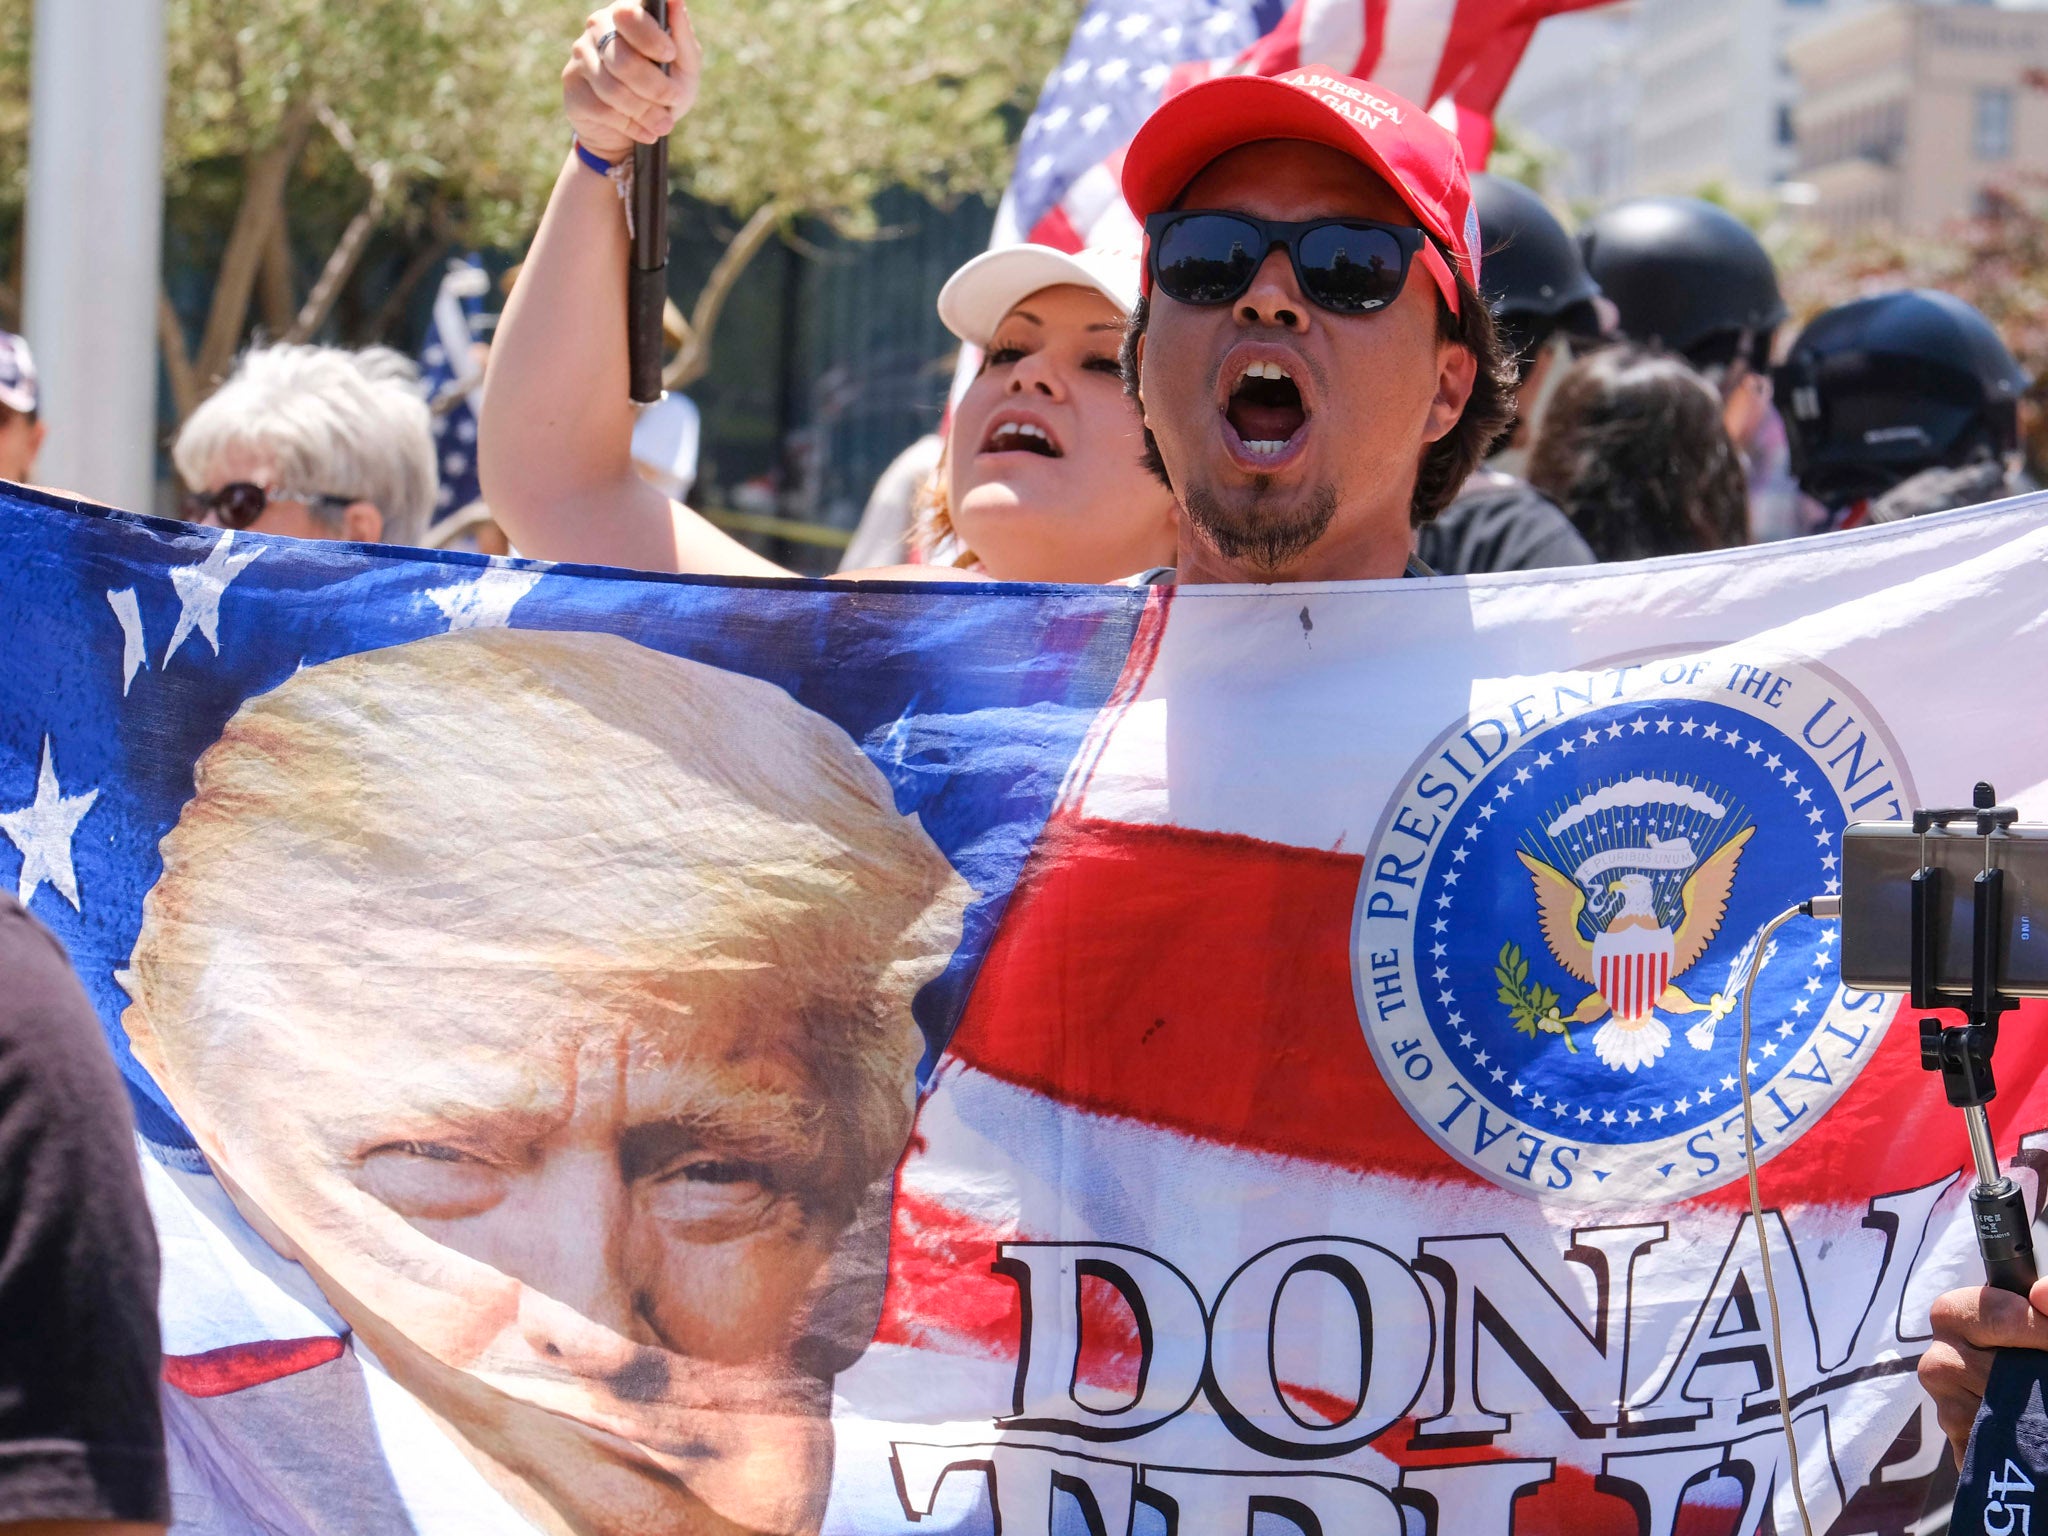 Donald Trump supporters demonstrating against anti-Trump protesters calling for the president's impeachment in Los Angeles